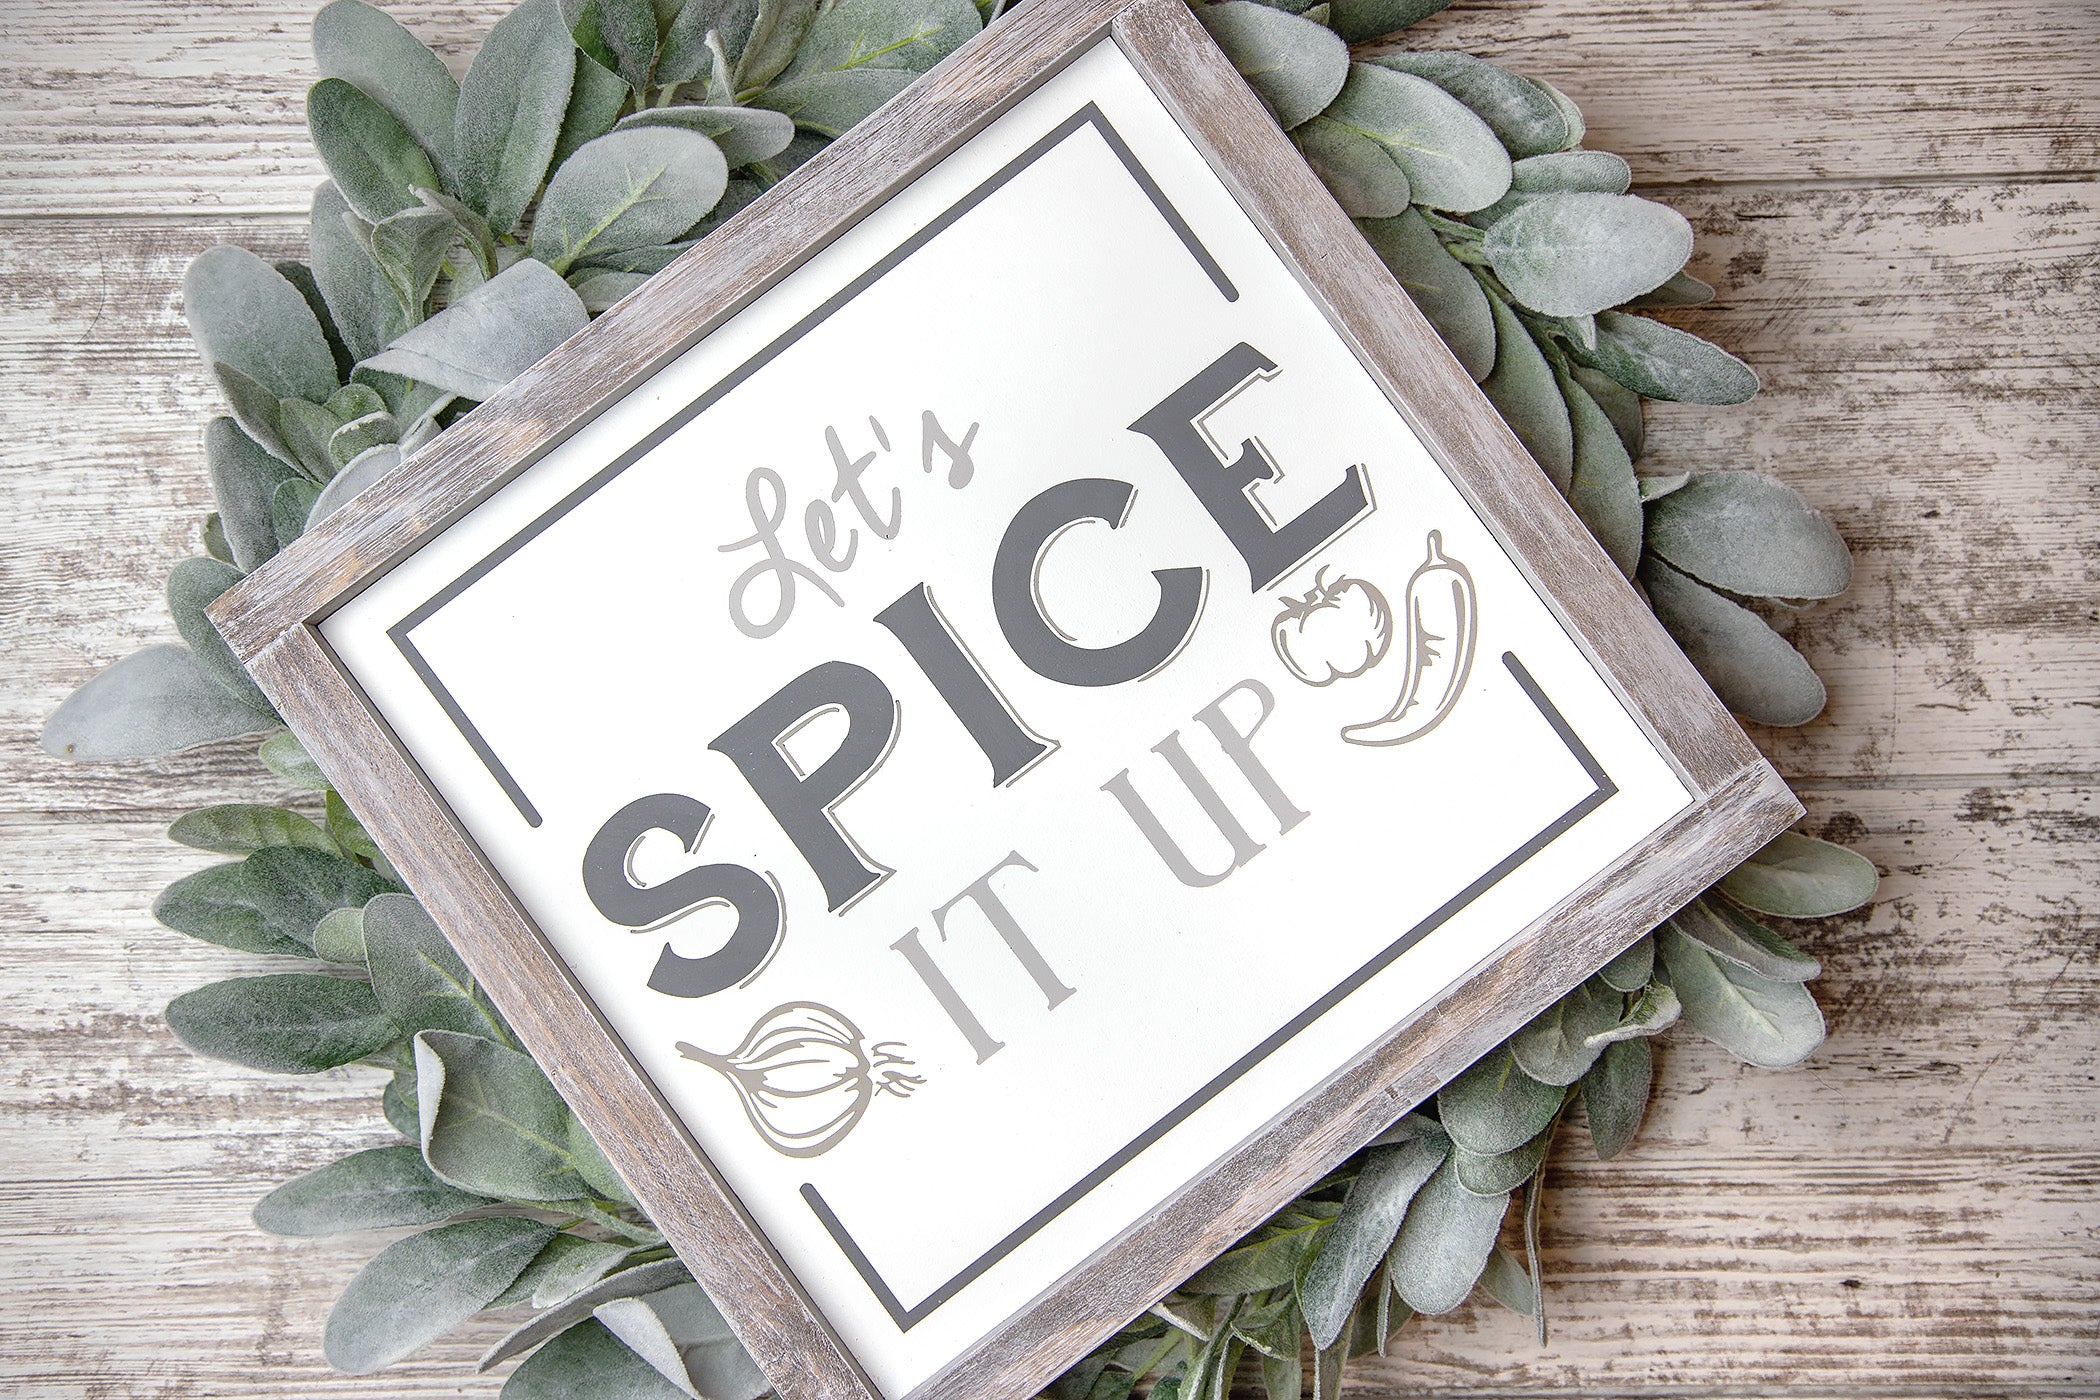 Spice it up! Spring 2021 - Spice it up!